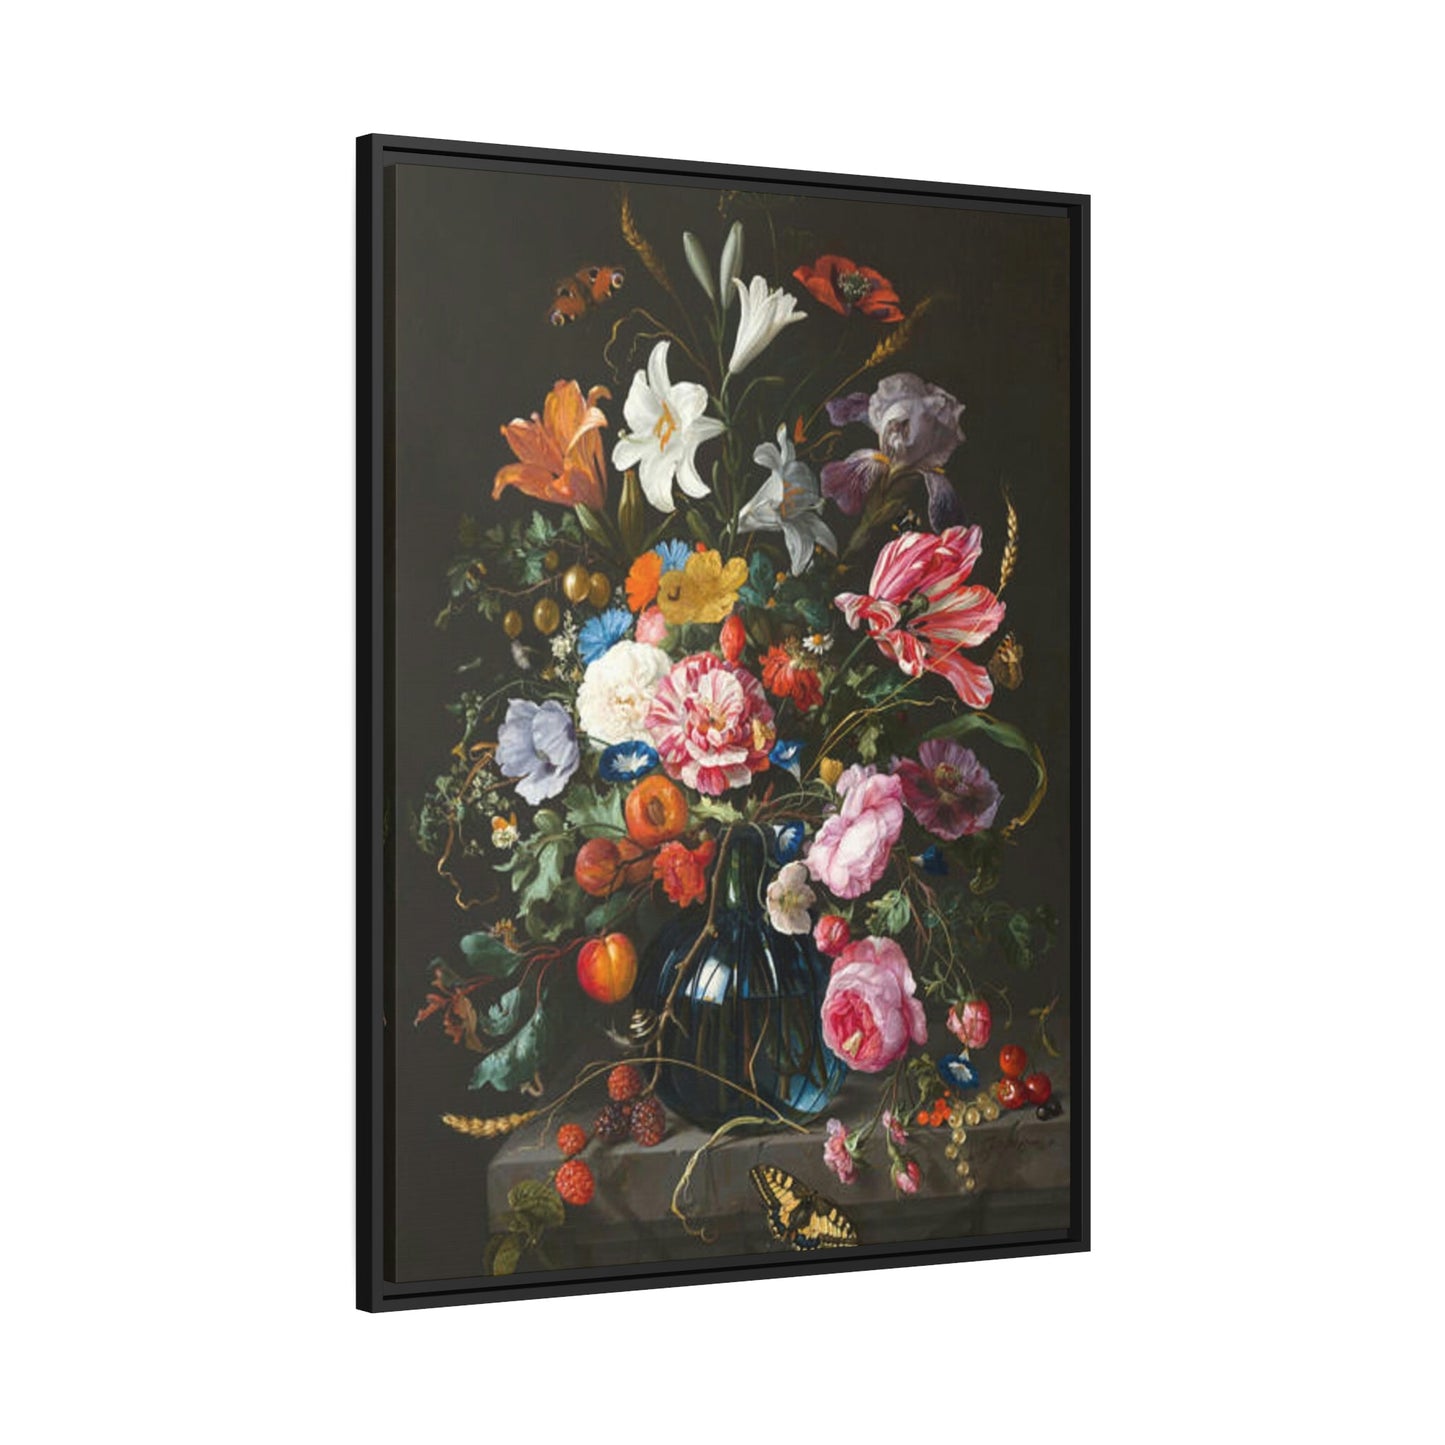 Vibrant Blooms in Print: Canvas and Wall Art of Colorful Flowers